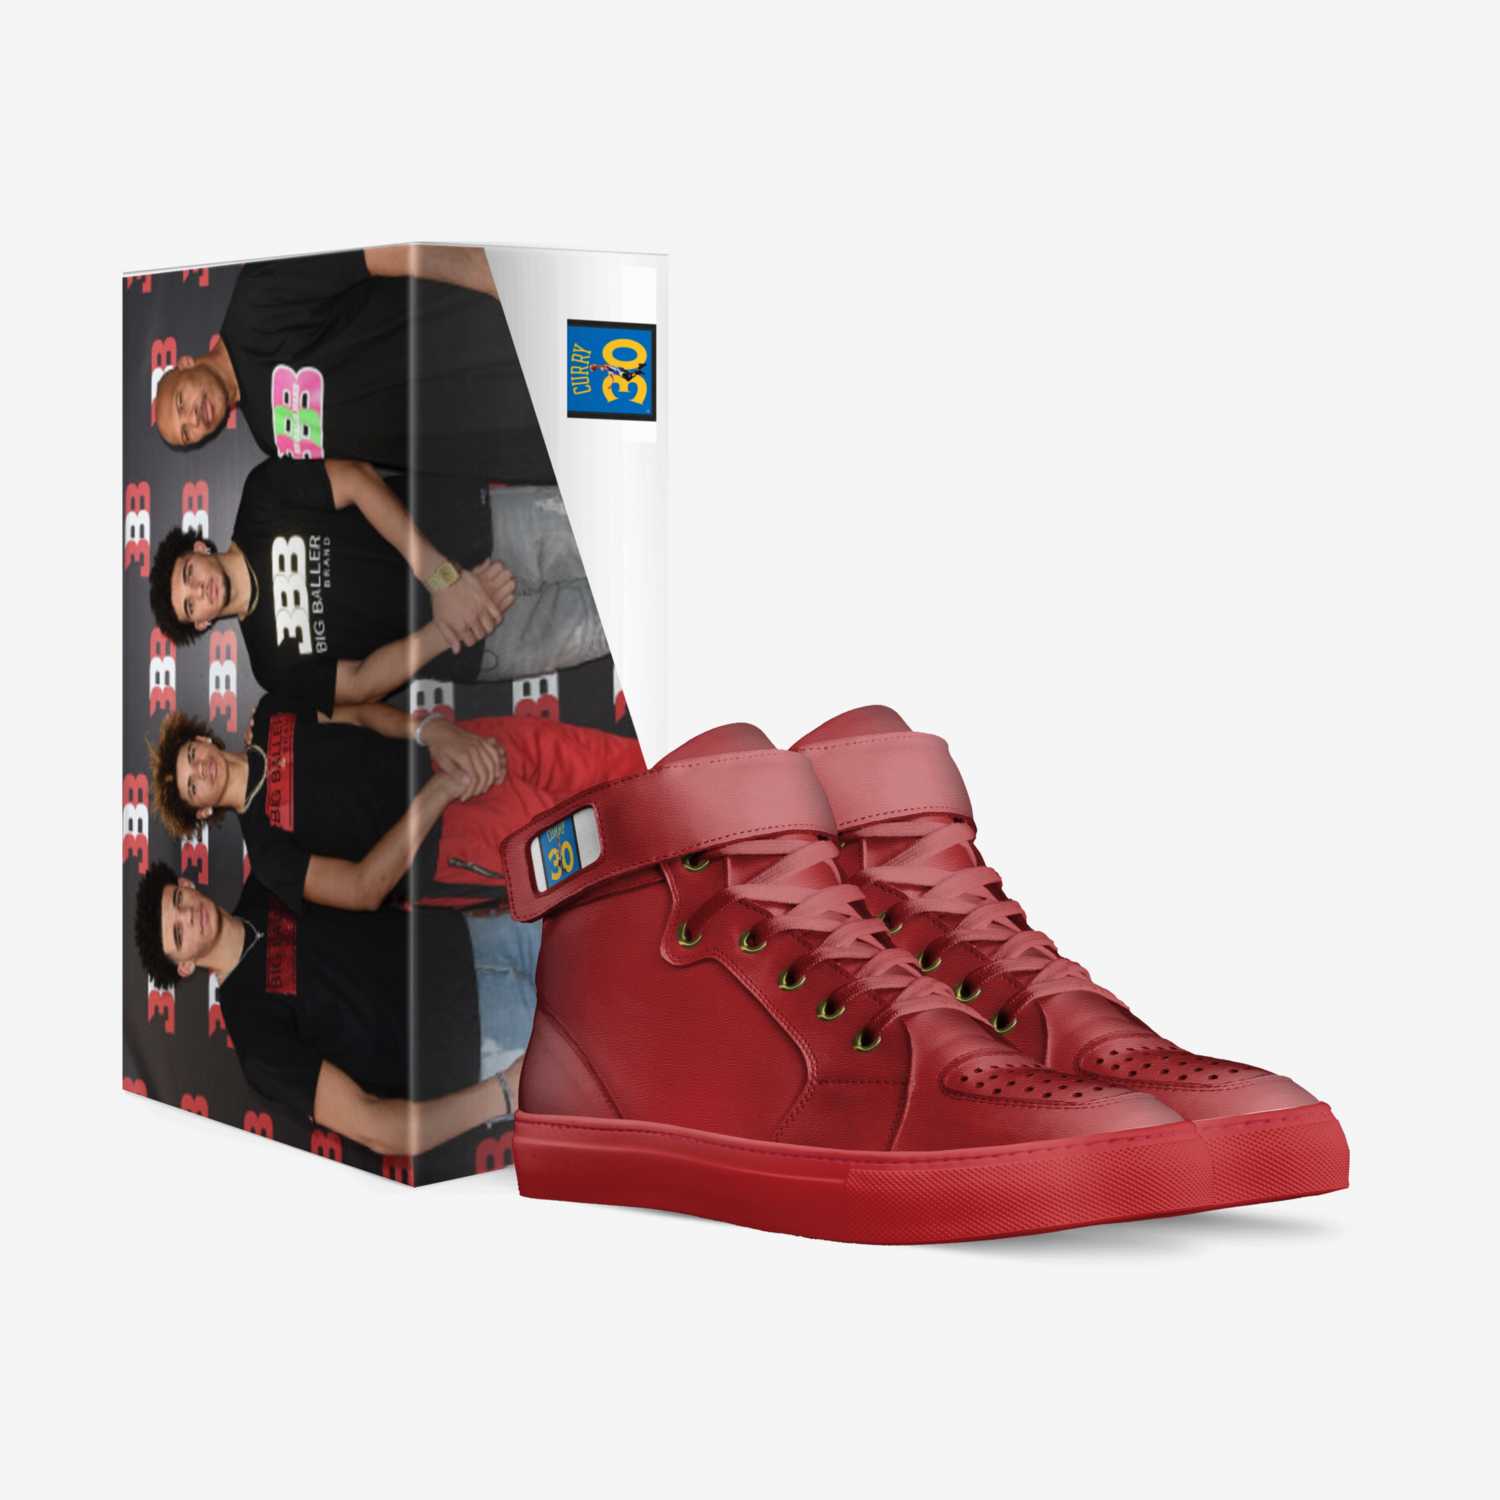 IV  A Custom Shoe concept by 21 Savage